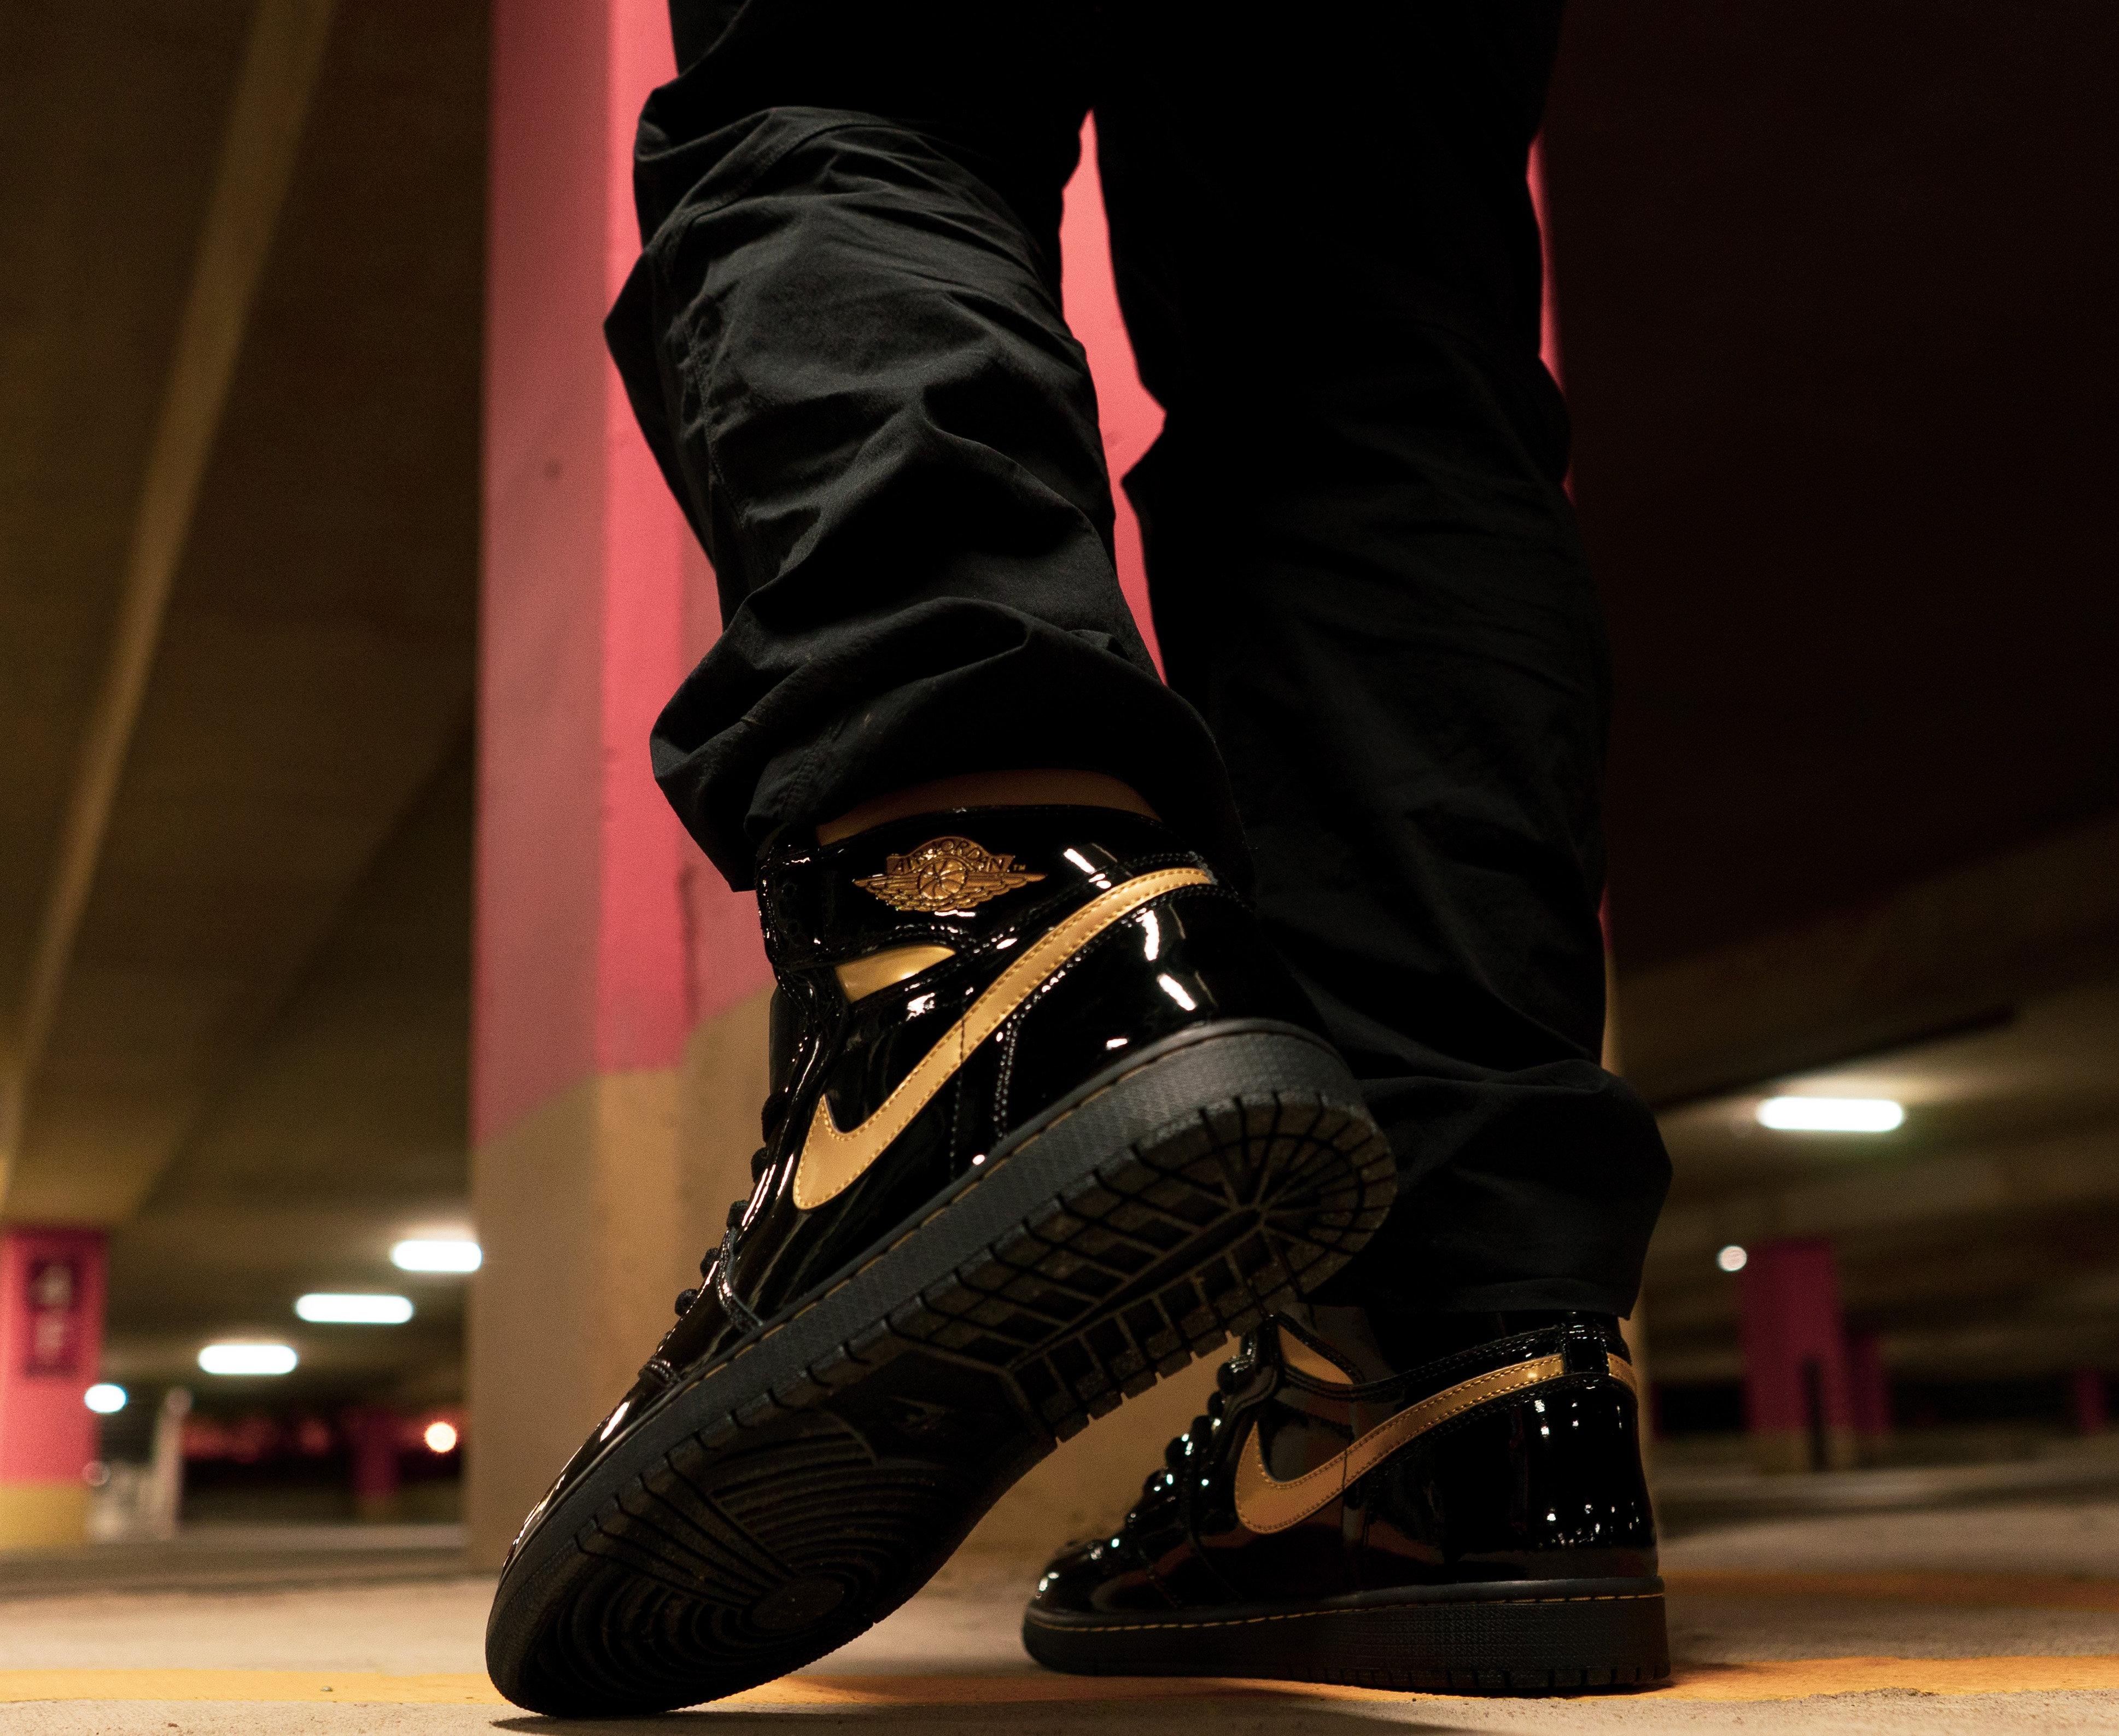 Nike Air Force 1 Mid (Black Suede/Metallic Gold)  Nike nfl shoes, Black  and gold jordans, Black and gold shoes